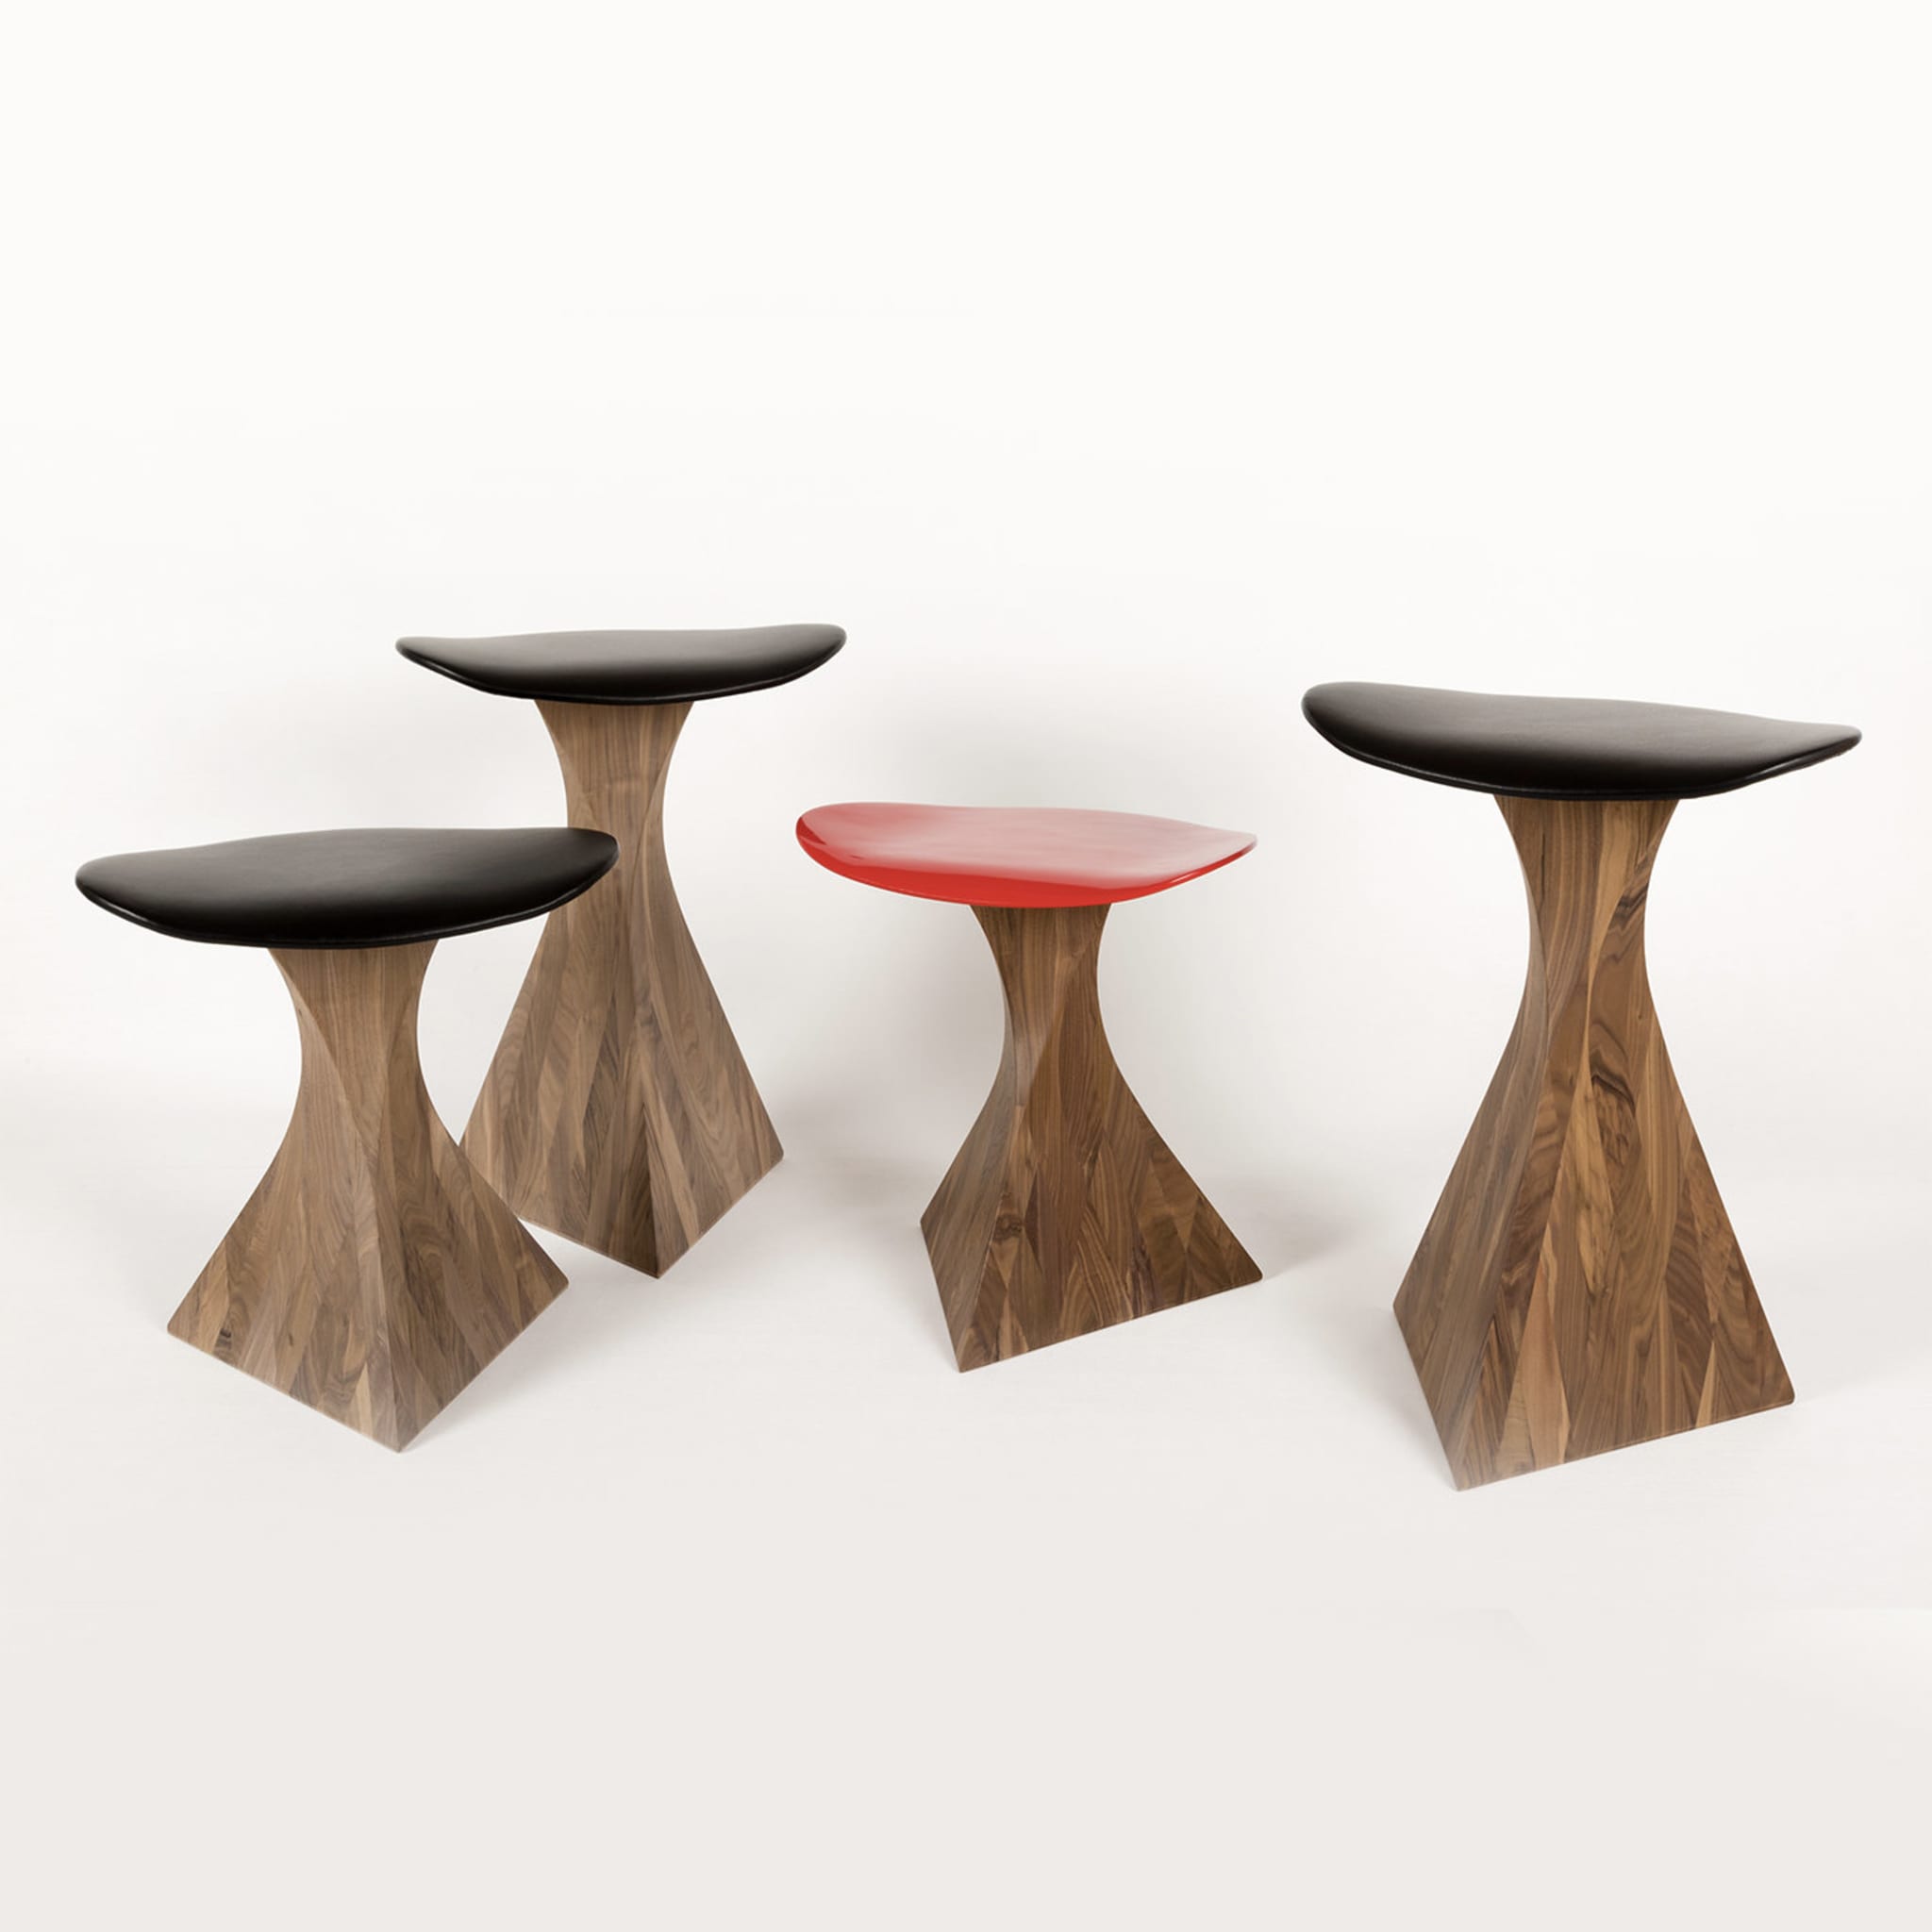 Audrey Red Stool by Mauro Dell'Orco - Alternative view 2